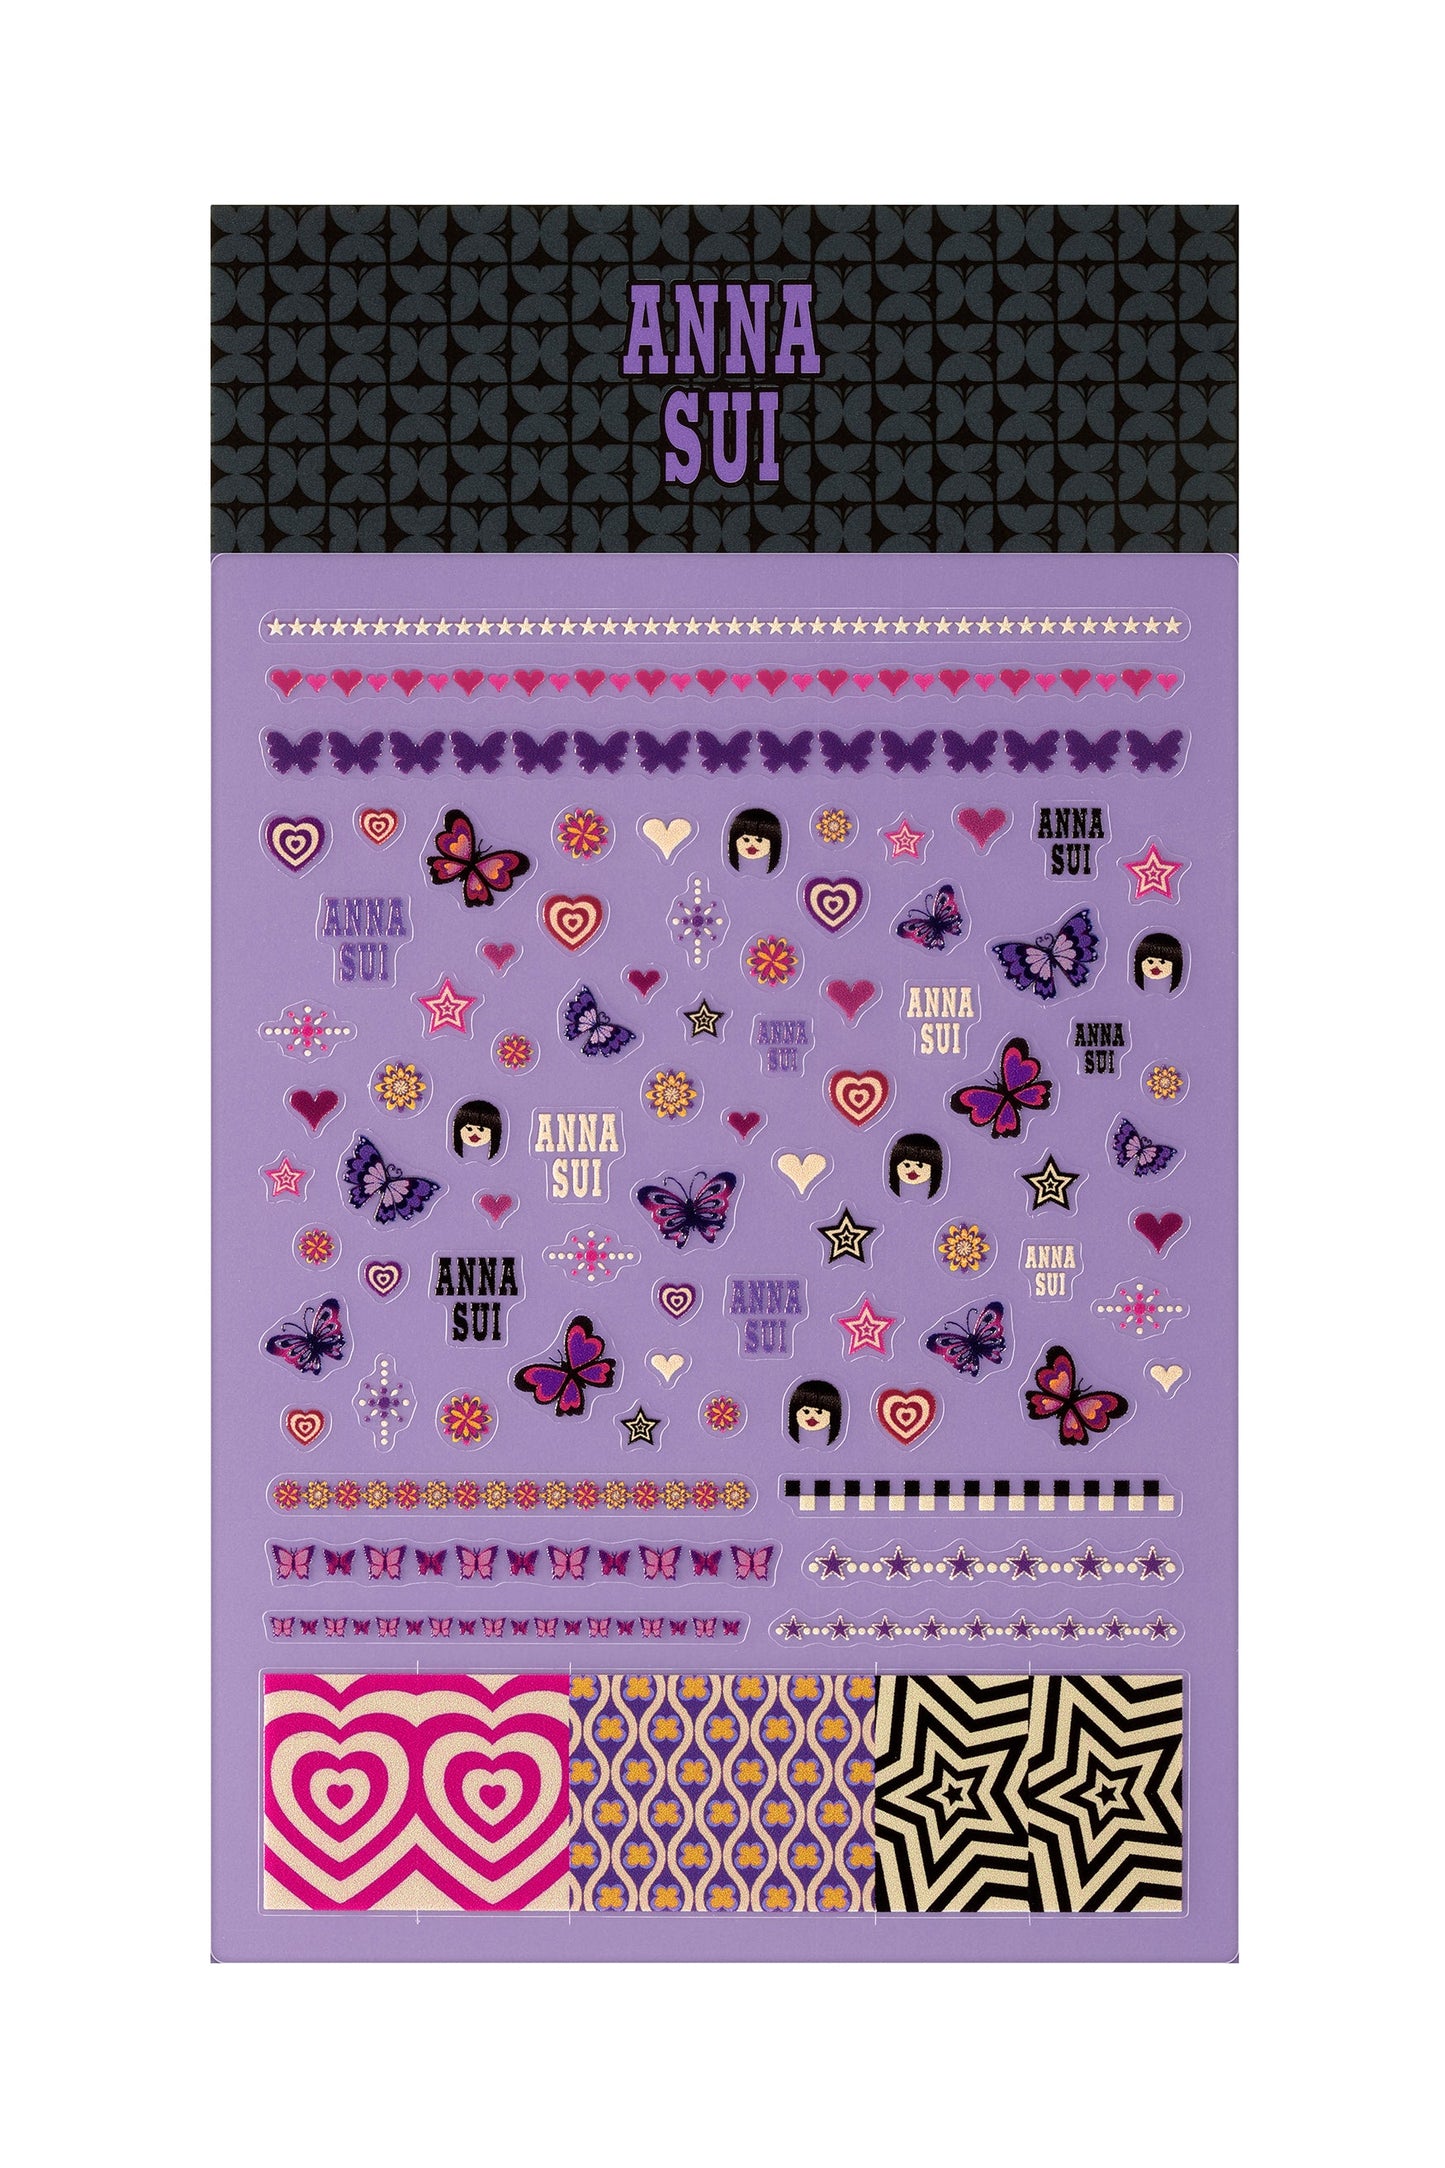 Nails Stickers inspired by Anna Sui's favorite butterflies, hearts, stars, signature, character face. 